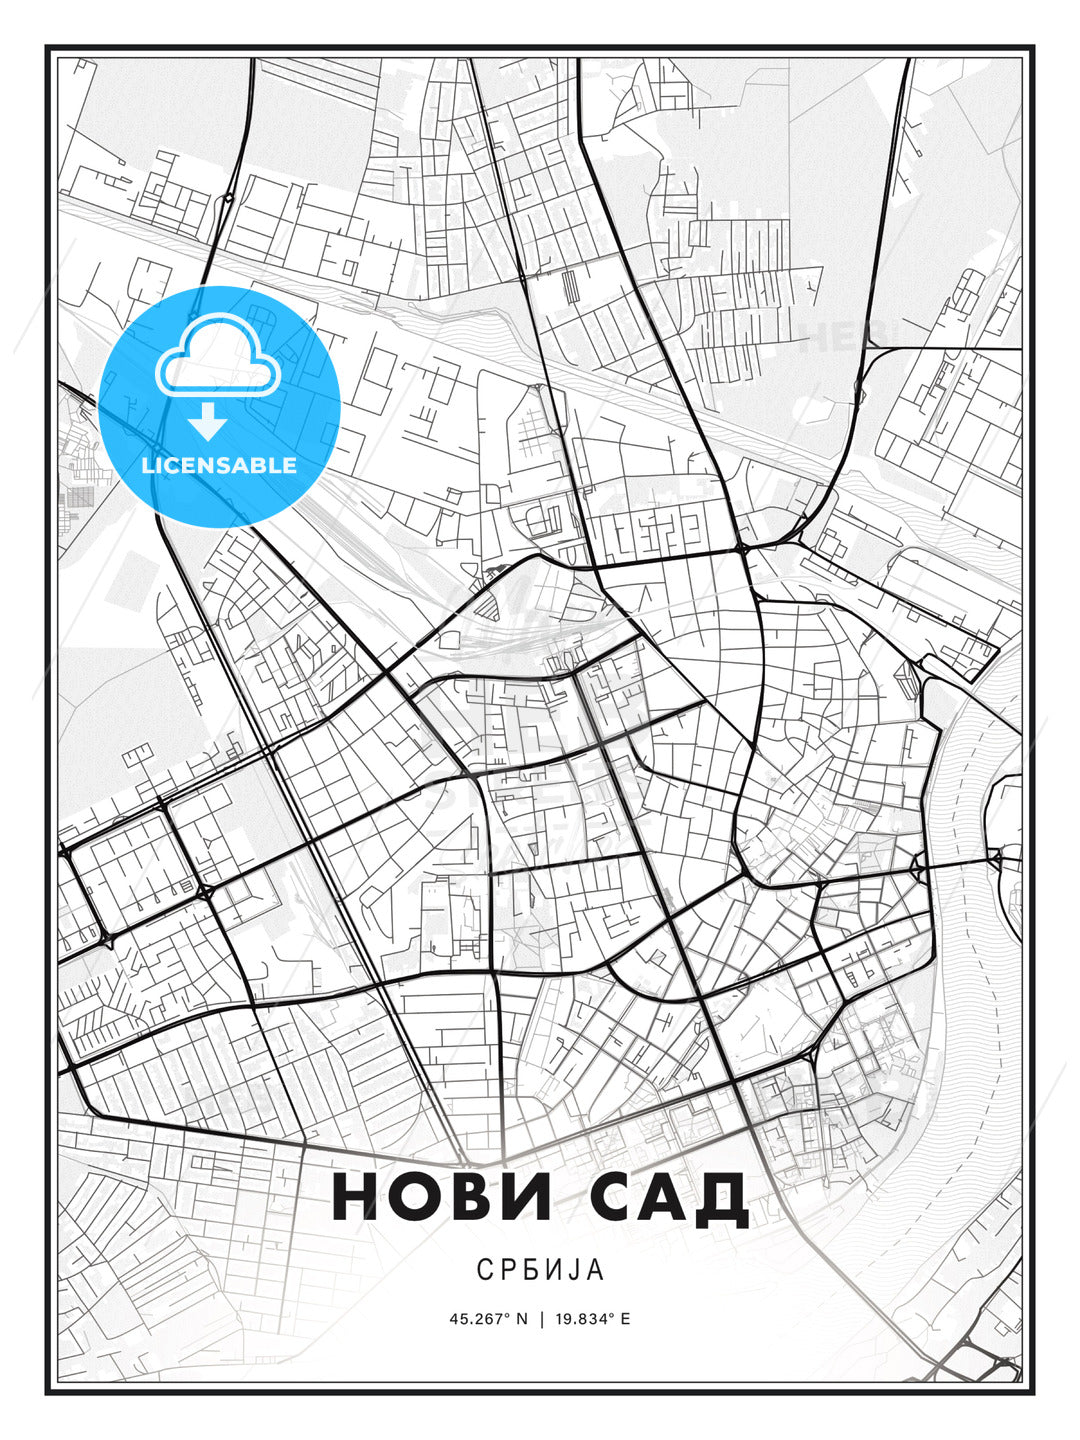 НОВИ САД / Novi Sad, Serbia, Modern Print Template in Various Formats - HEBSTREITS Sketches